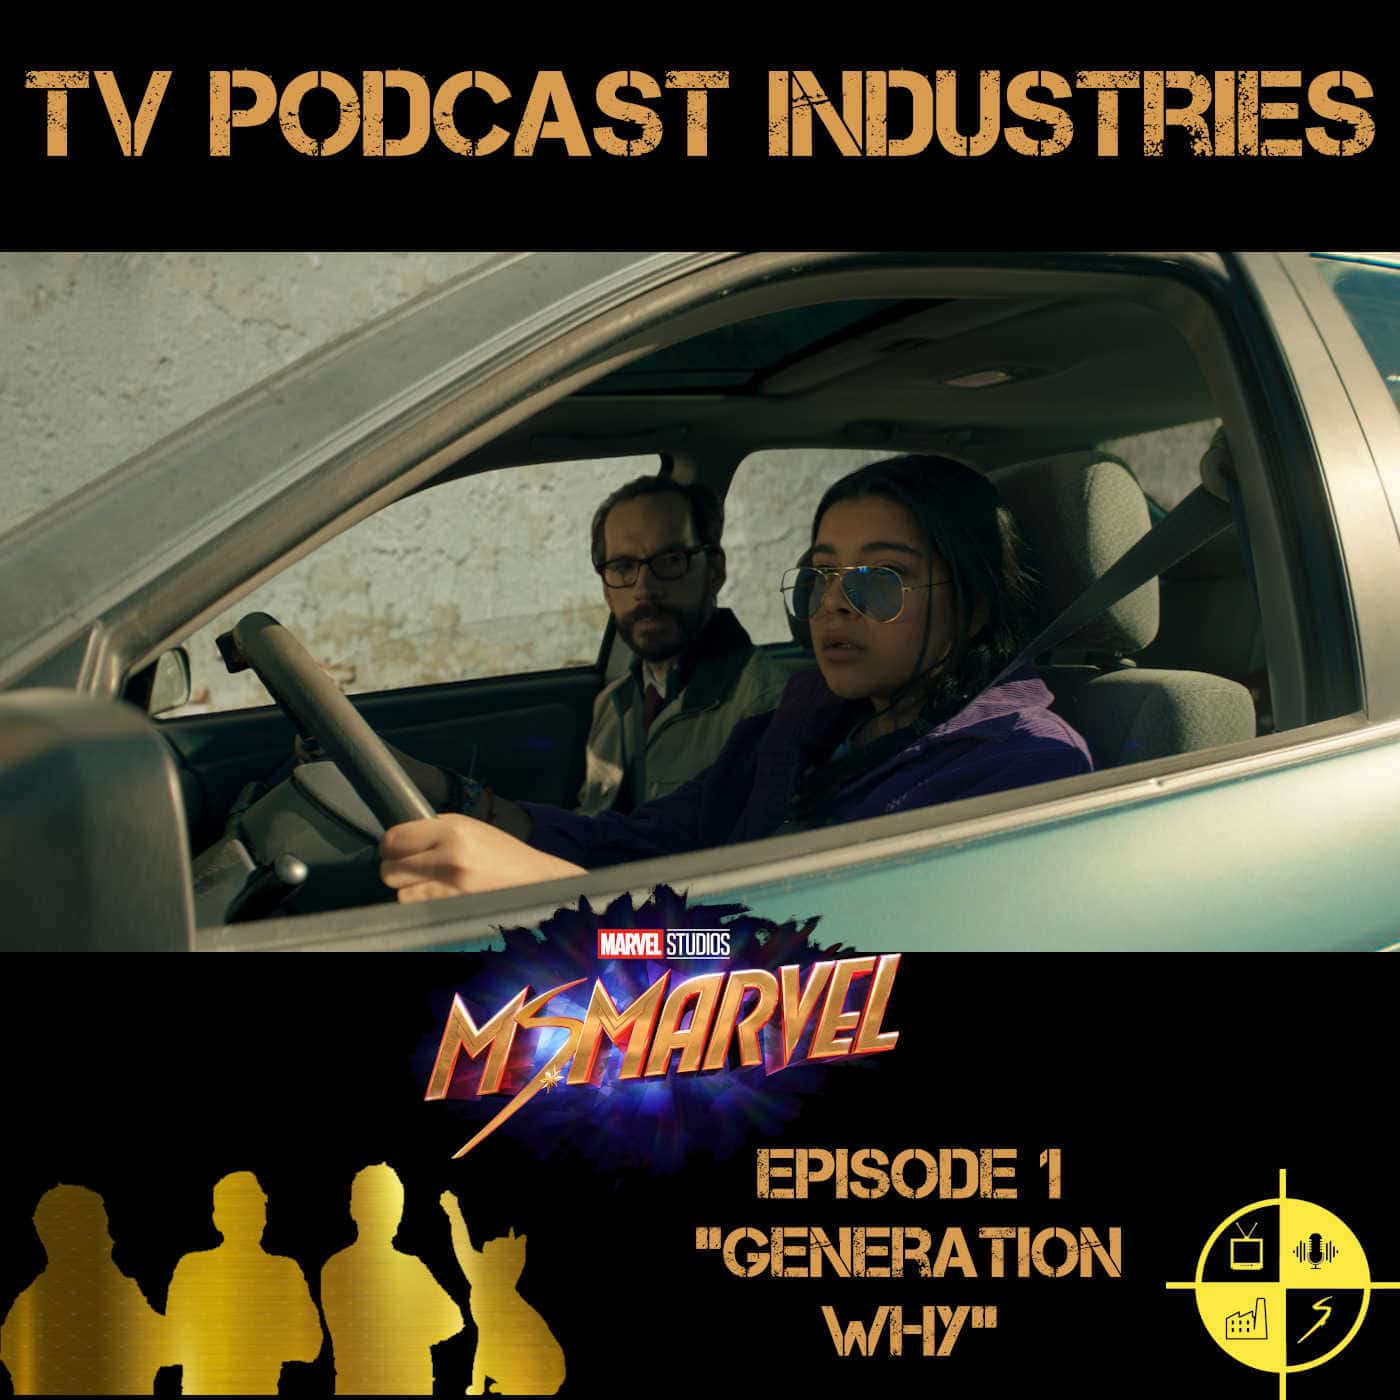 Ms Marvel Episode 1 Generation Why Podcast